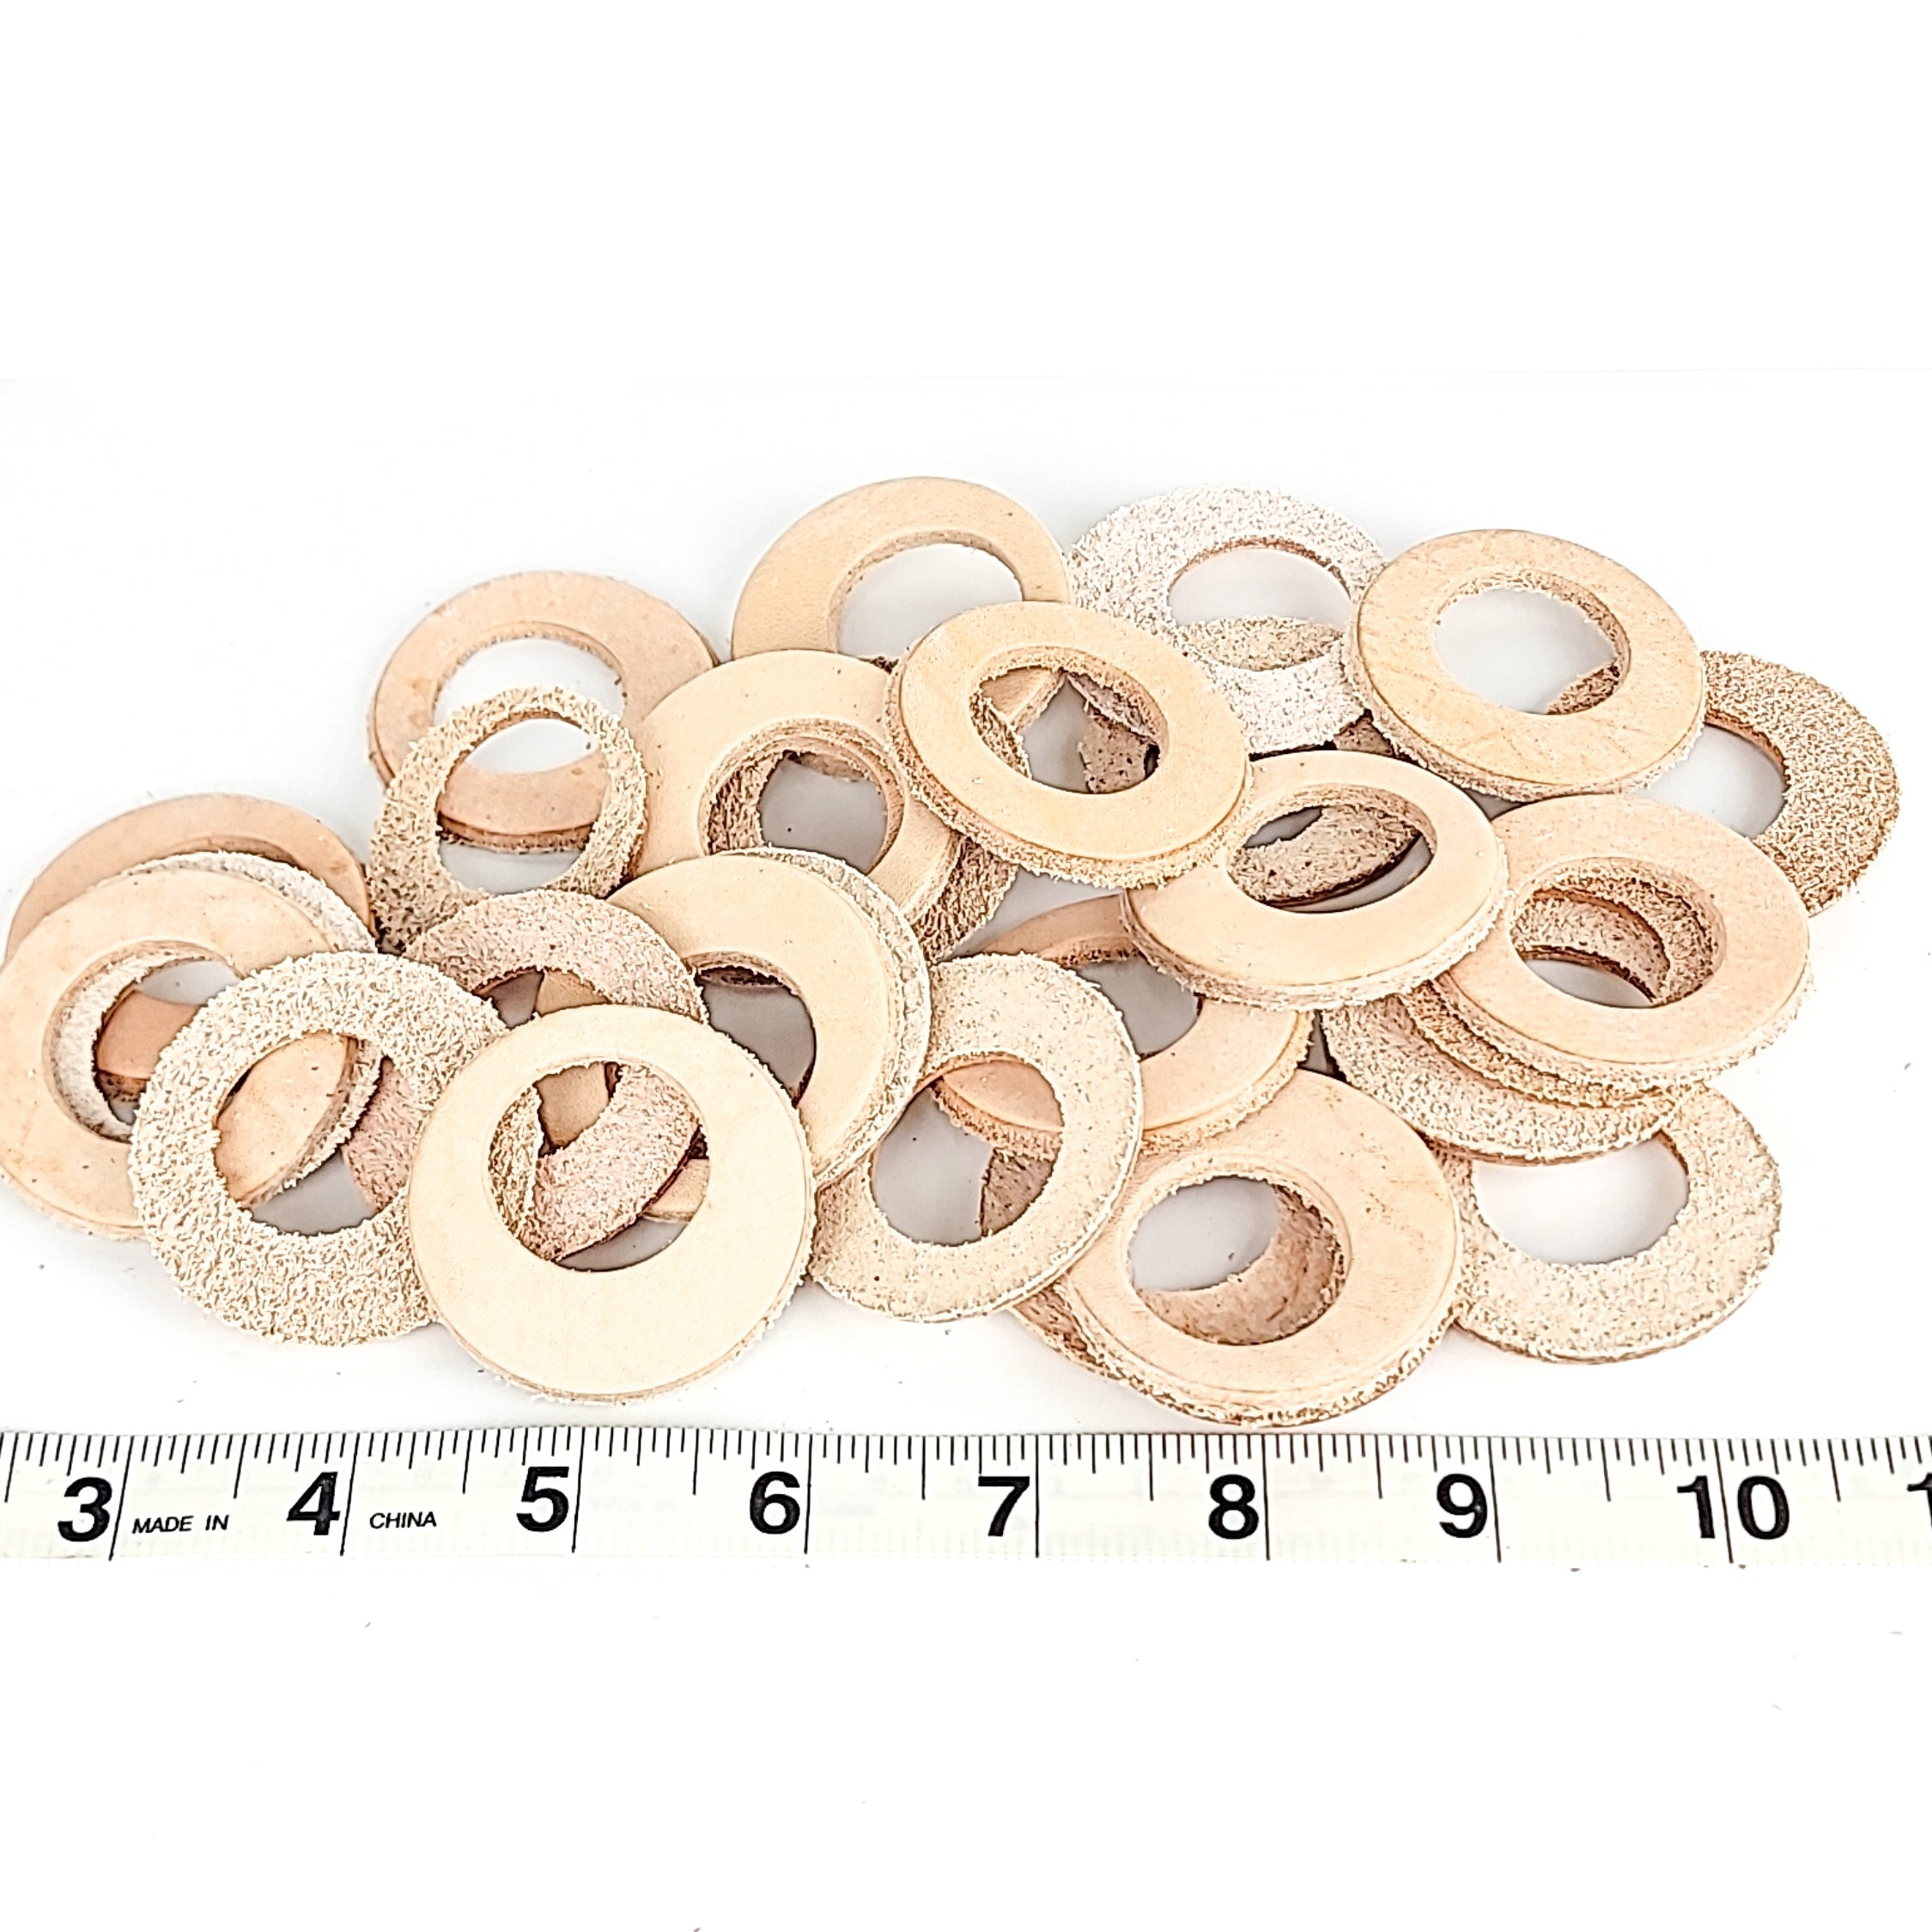 Leather Wonky Washers - 10 Pack